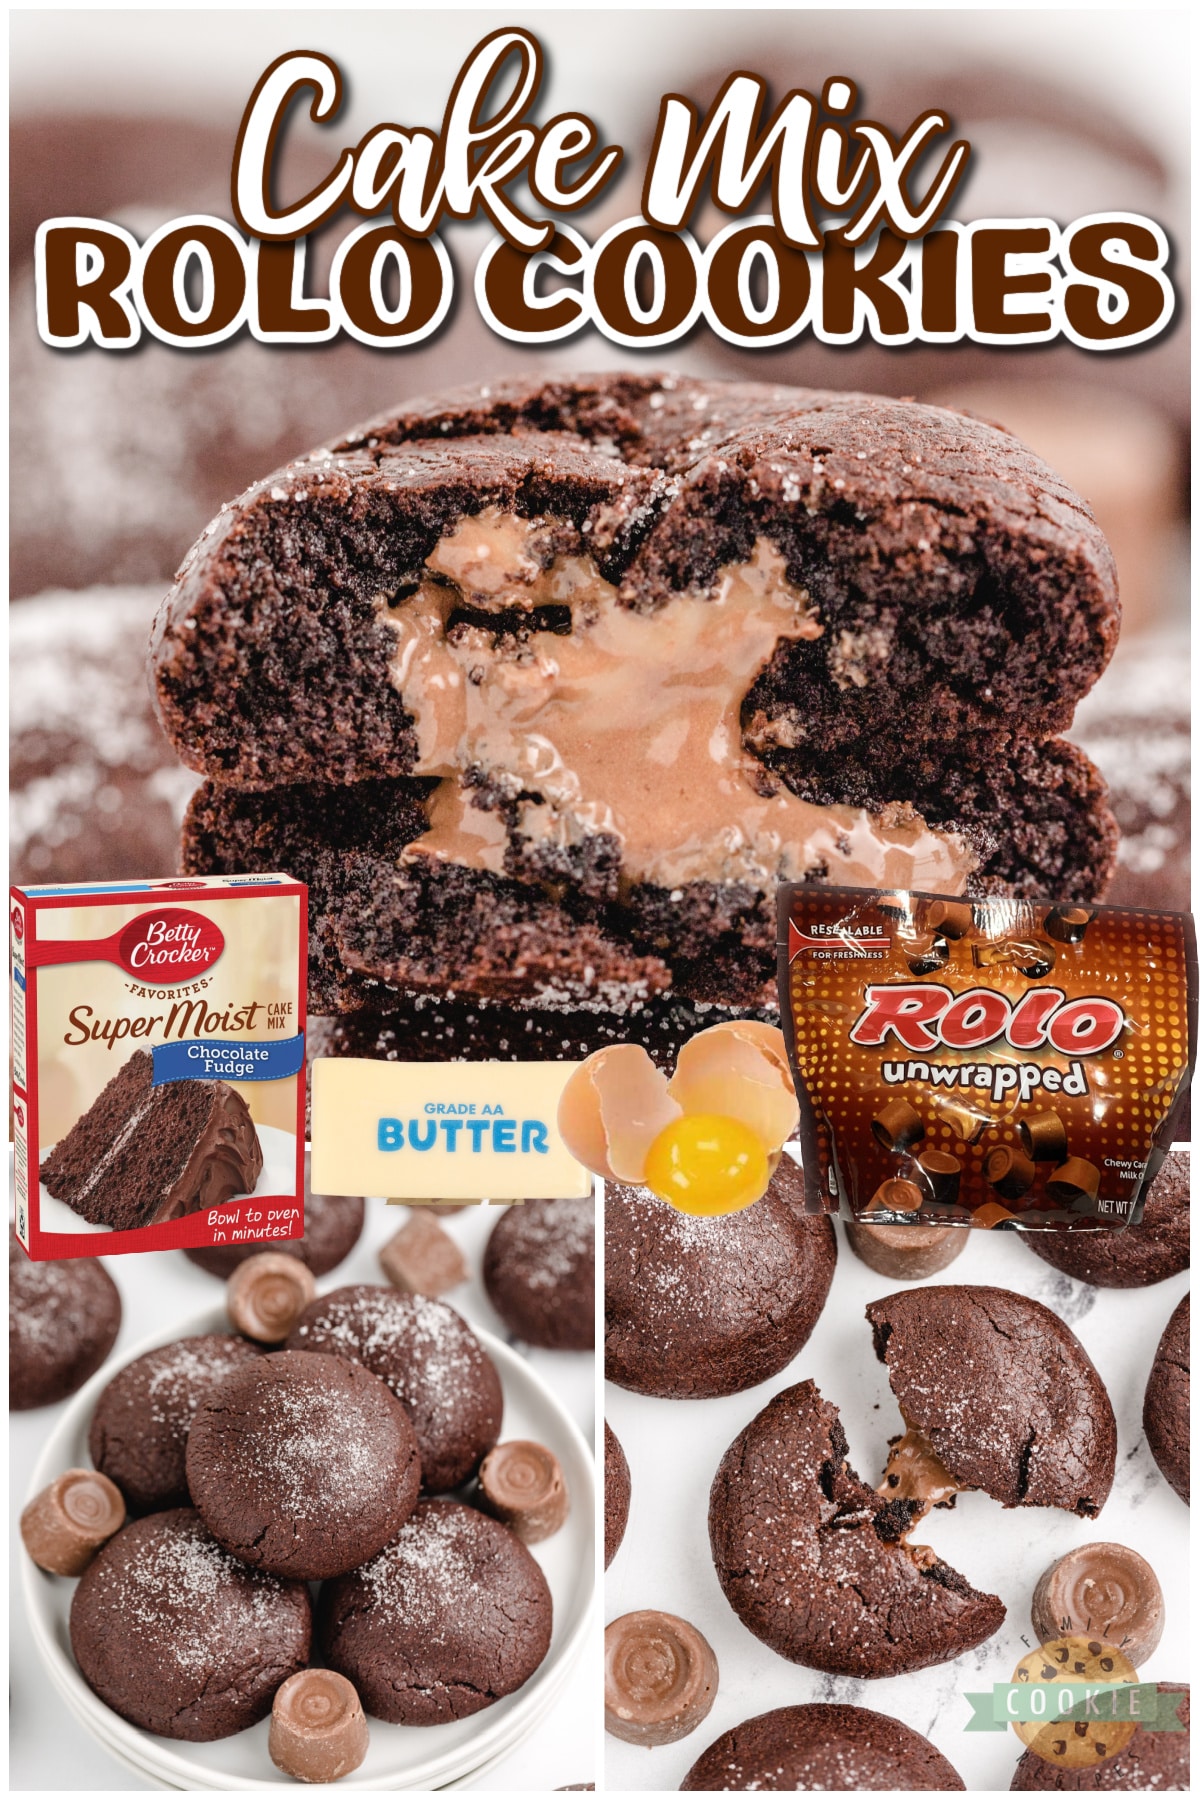 Cake Mix Rolo Cookies are made with only 4 ingredients - one of which is the Rolo tucked in the middle! These cookies are so easy to make, and they are absolutely delicious with the gooey caramel centers.